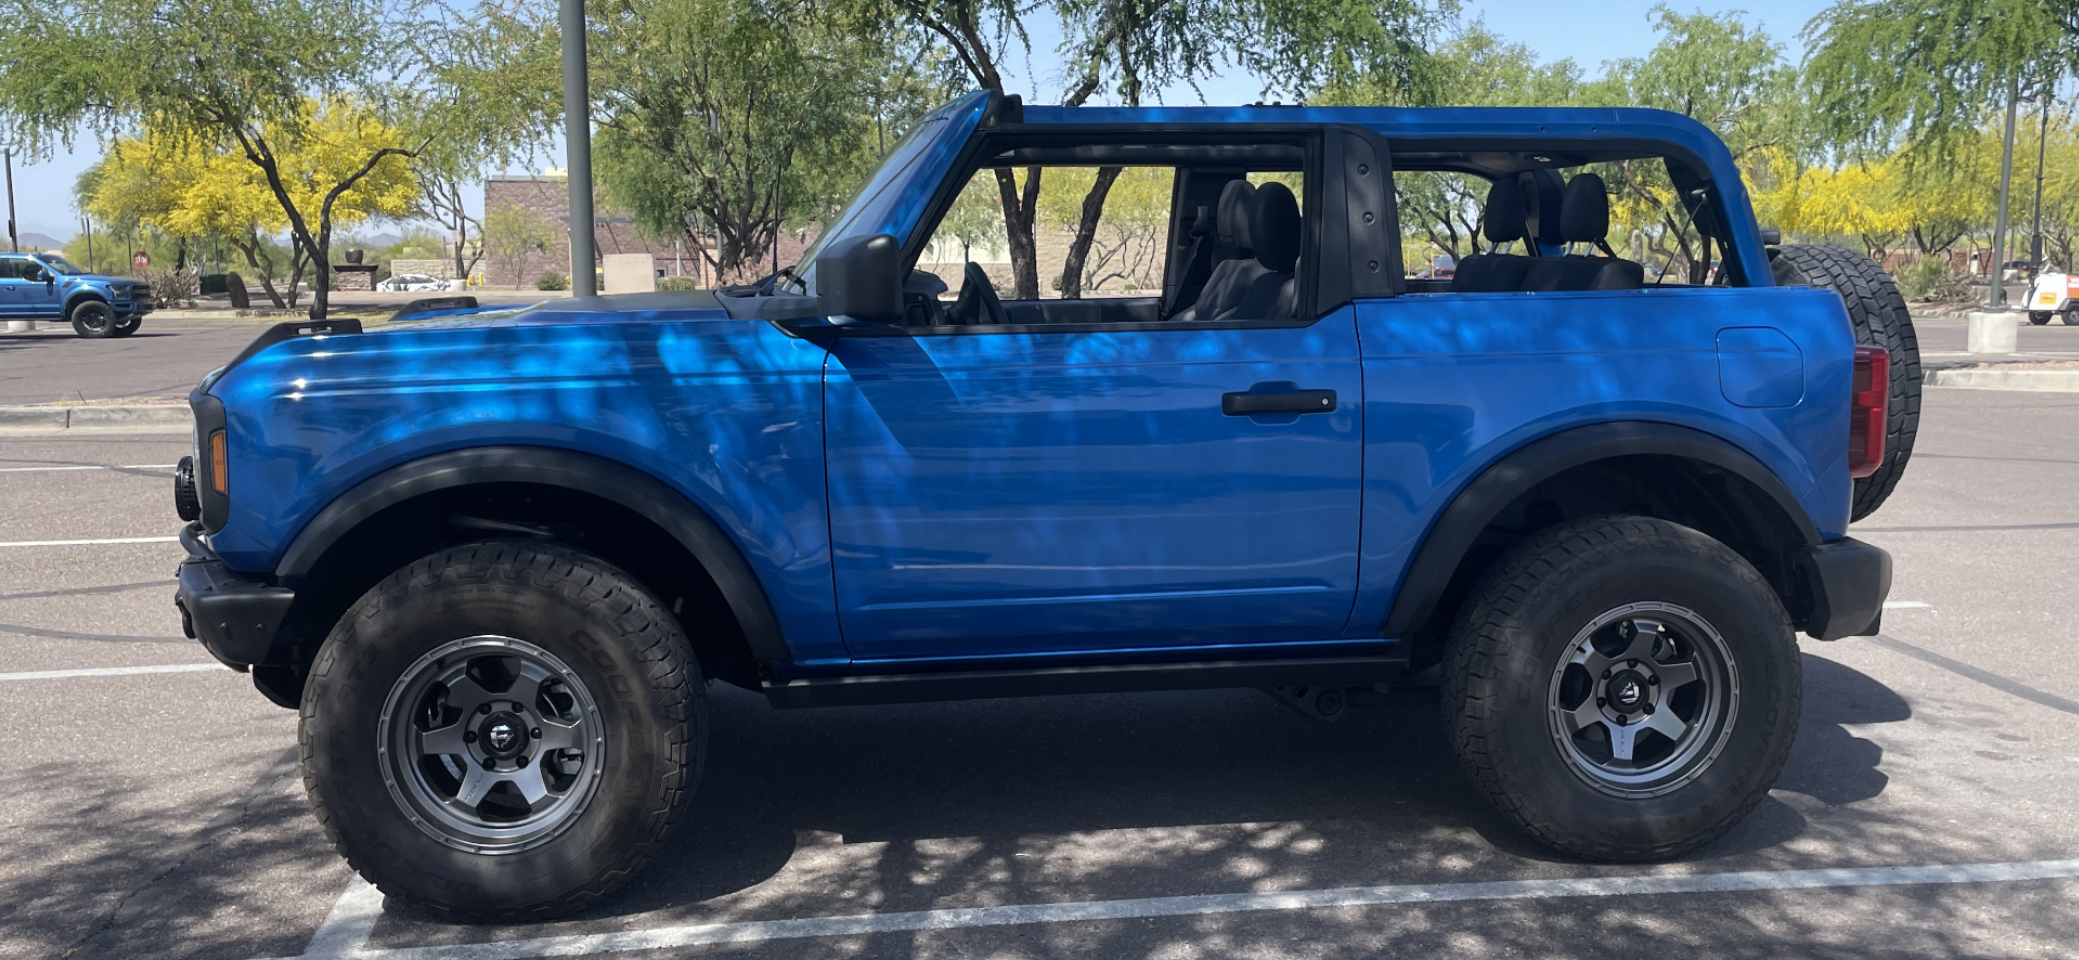 Ford Bronco What is the Best color wheels for a Velocity Blue Wildtrak.. post your pics 1685673307979